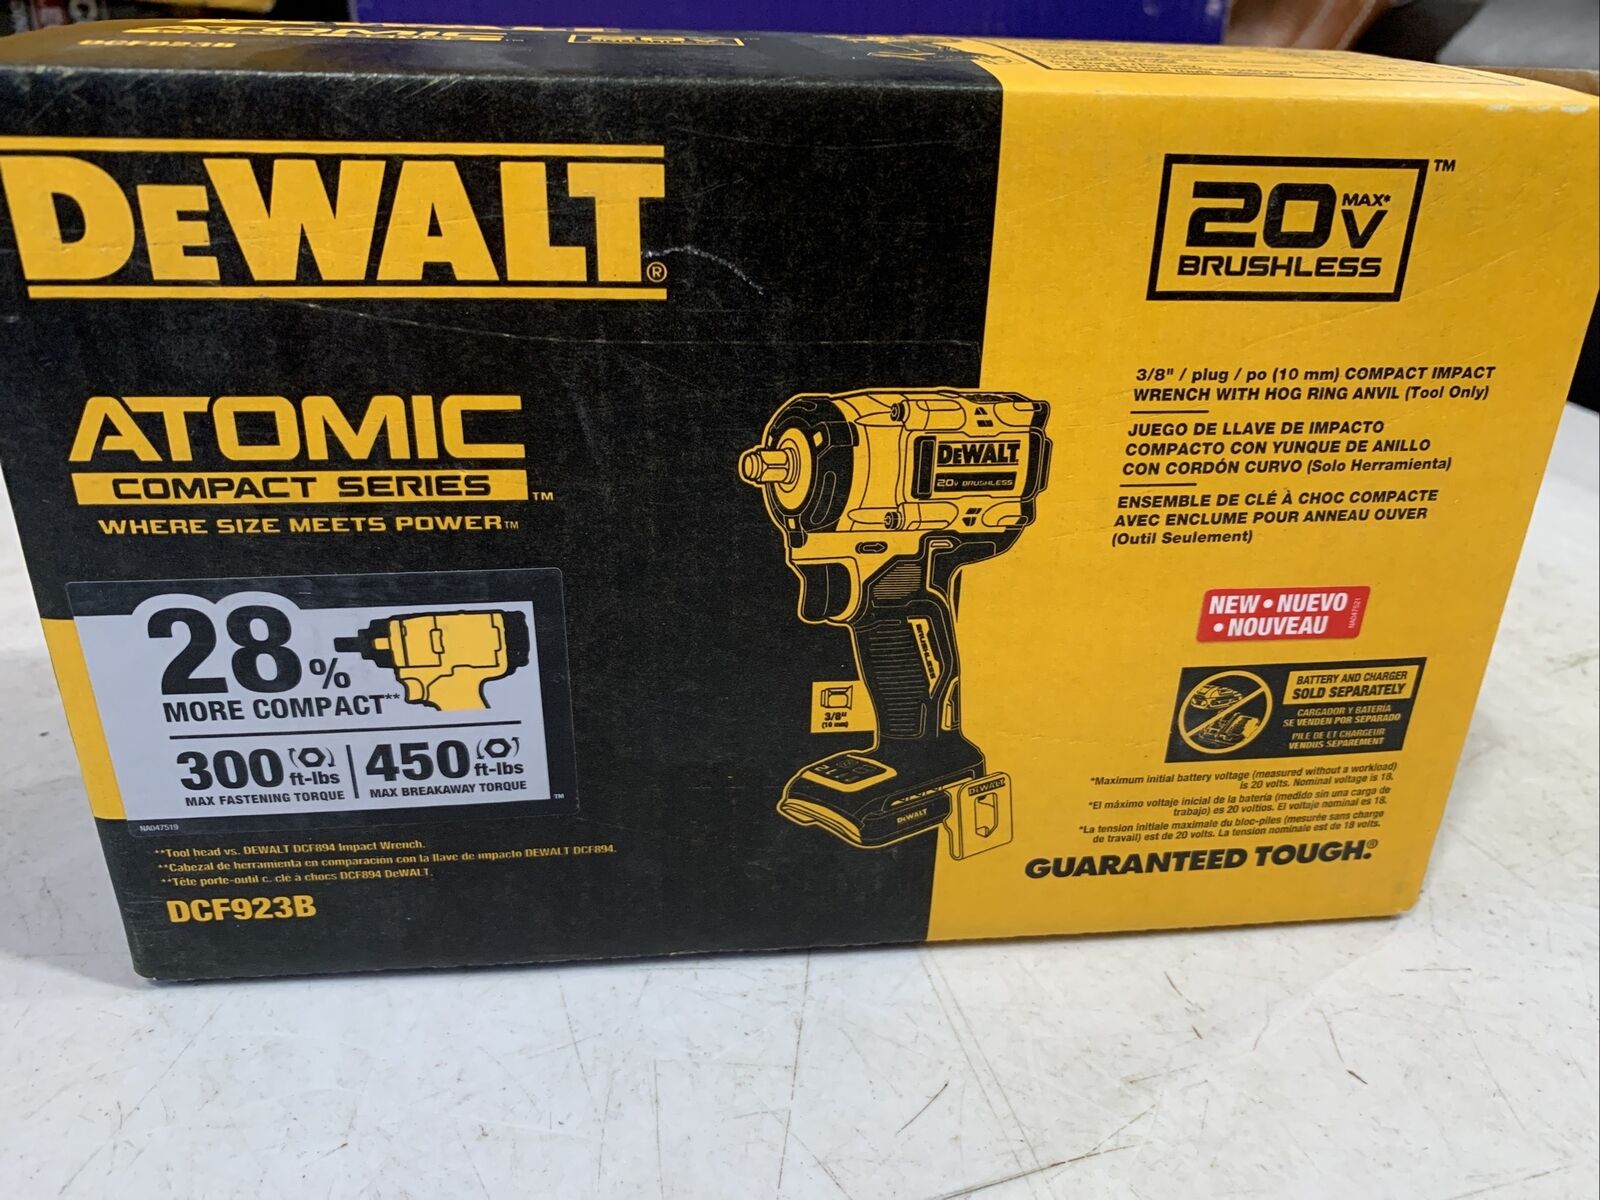 DEWALT DCF923B 20V 3/8inch Compact Impact Wrench (TOOL ONLY)